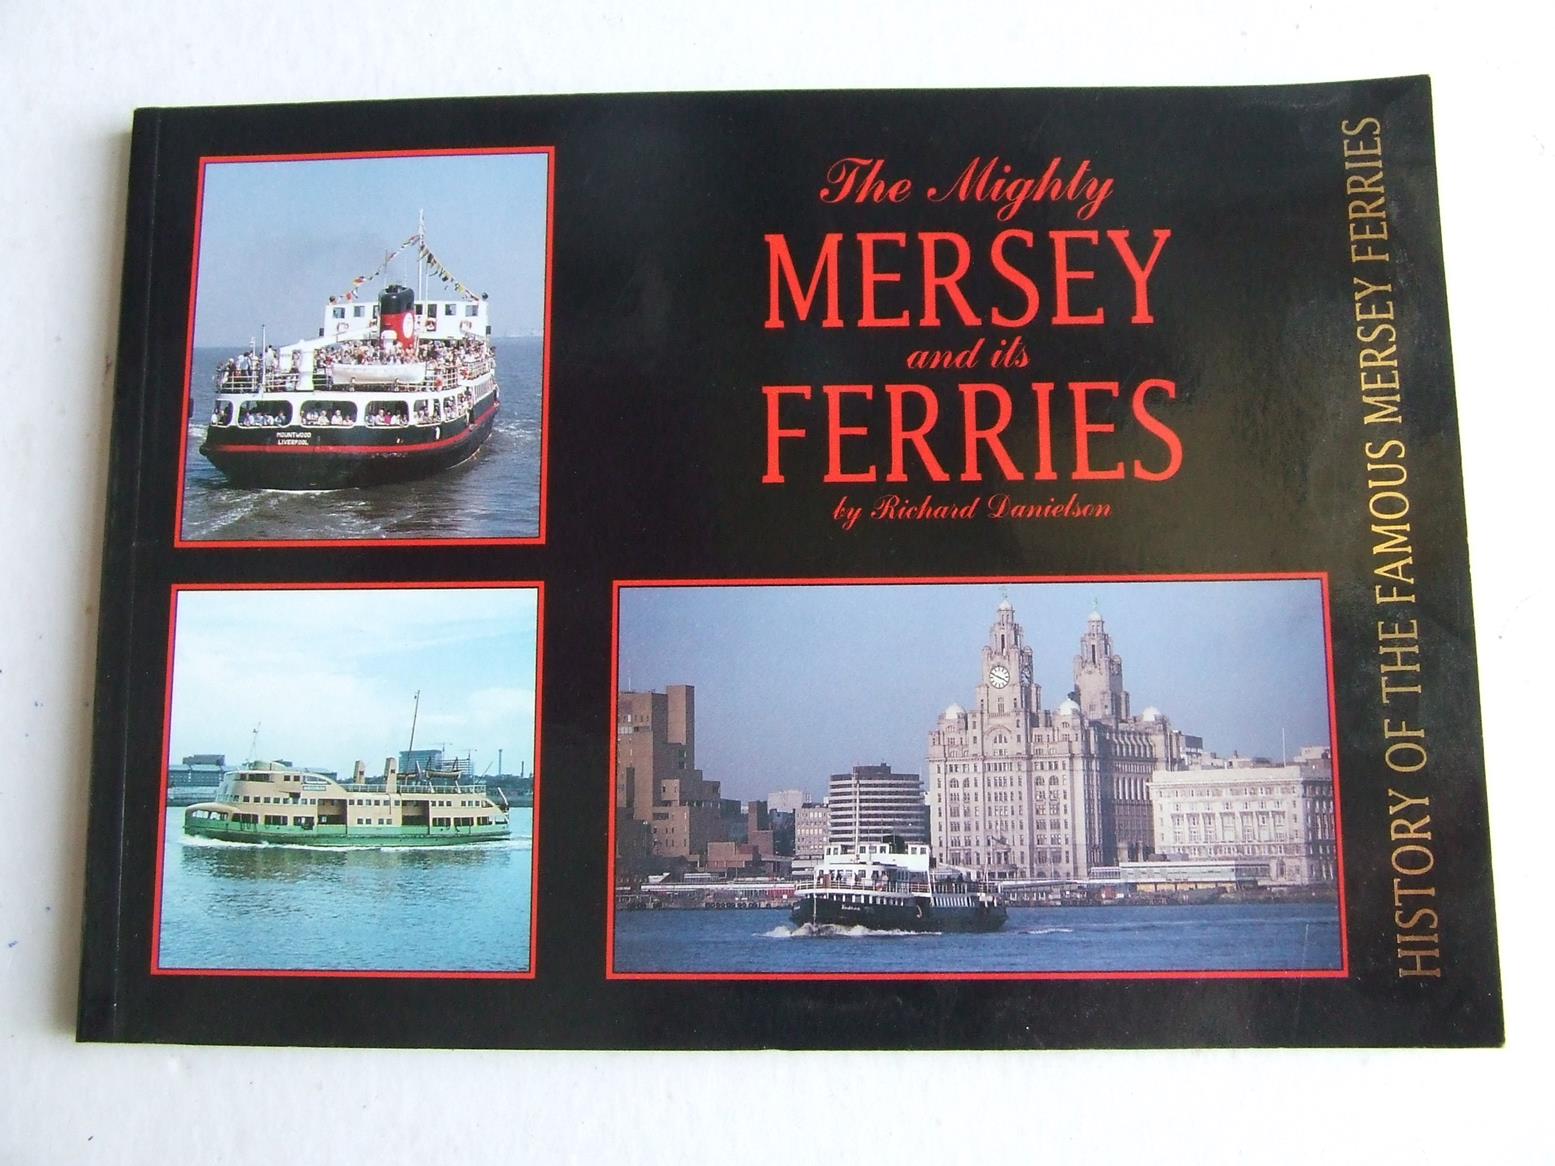 The Mighty Mersey and its Ferries